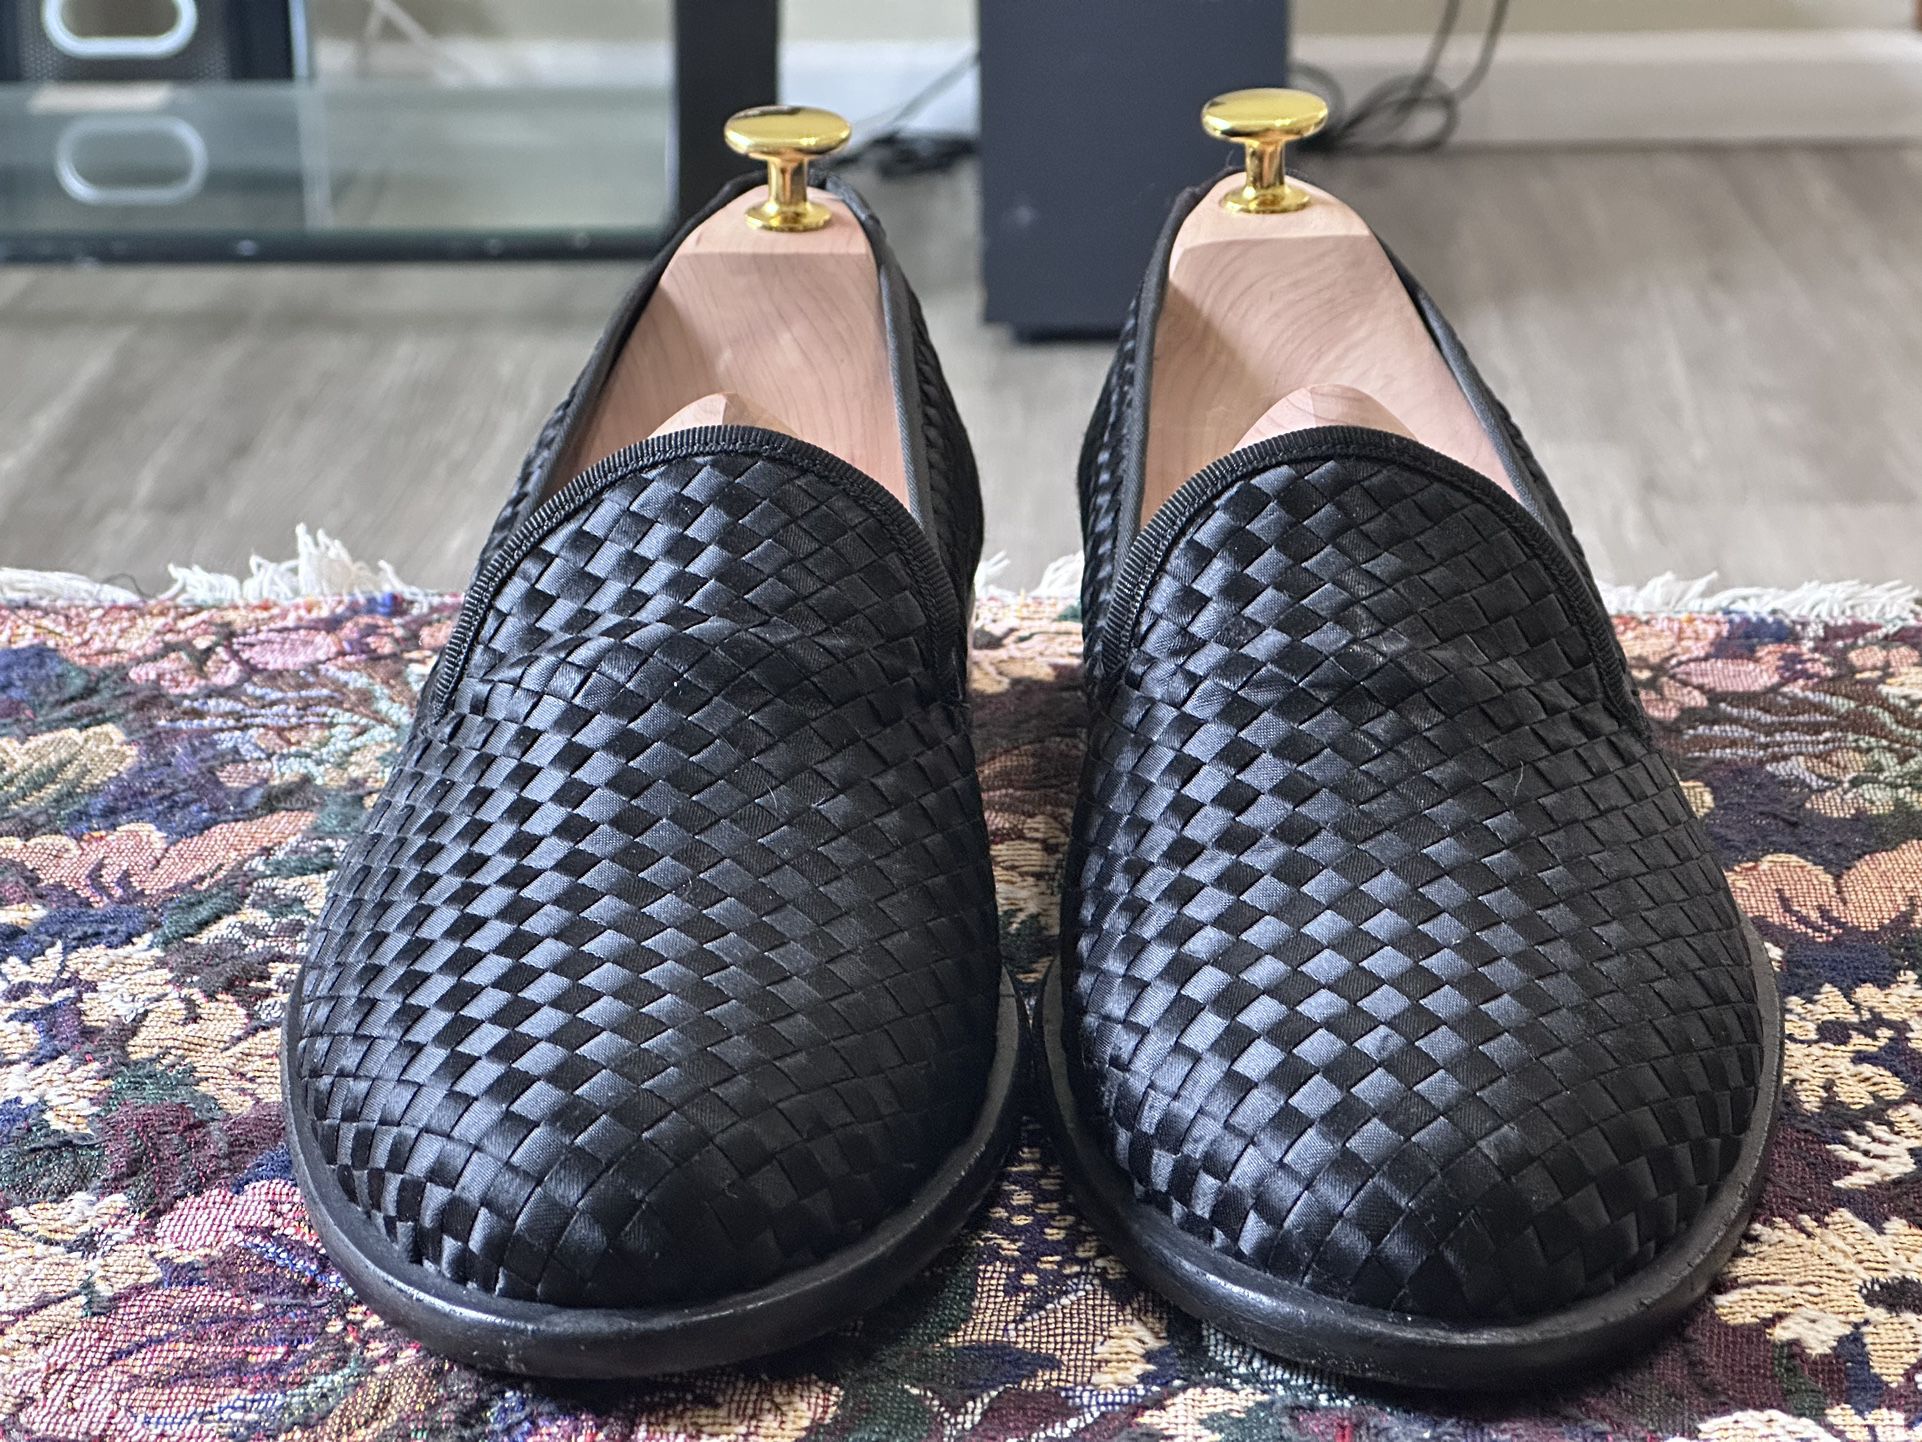 BRAGANO Handcrafted In Italy Woven Loafers Size 12 M